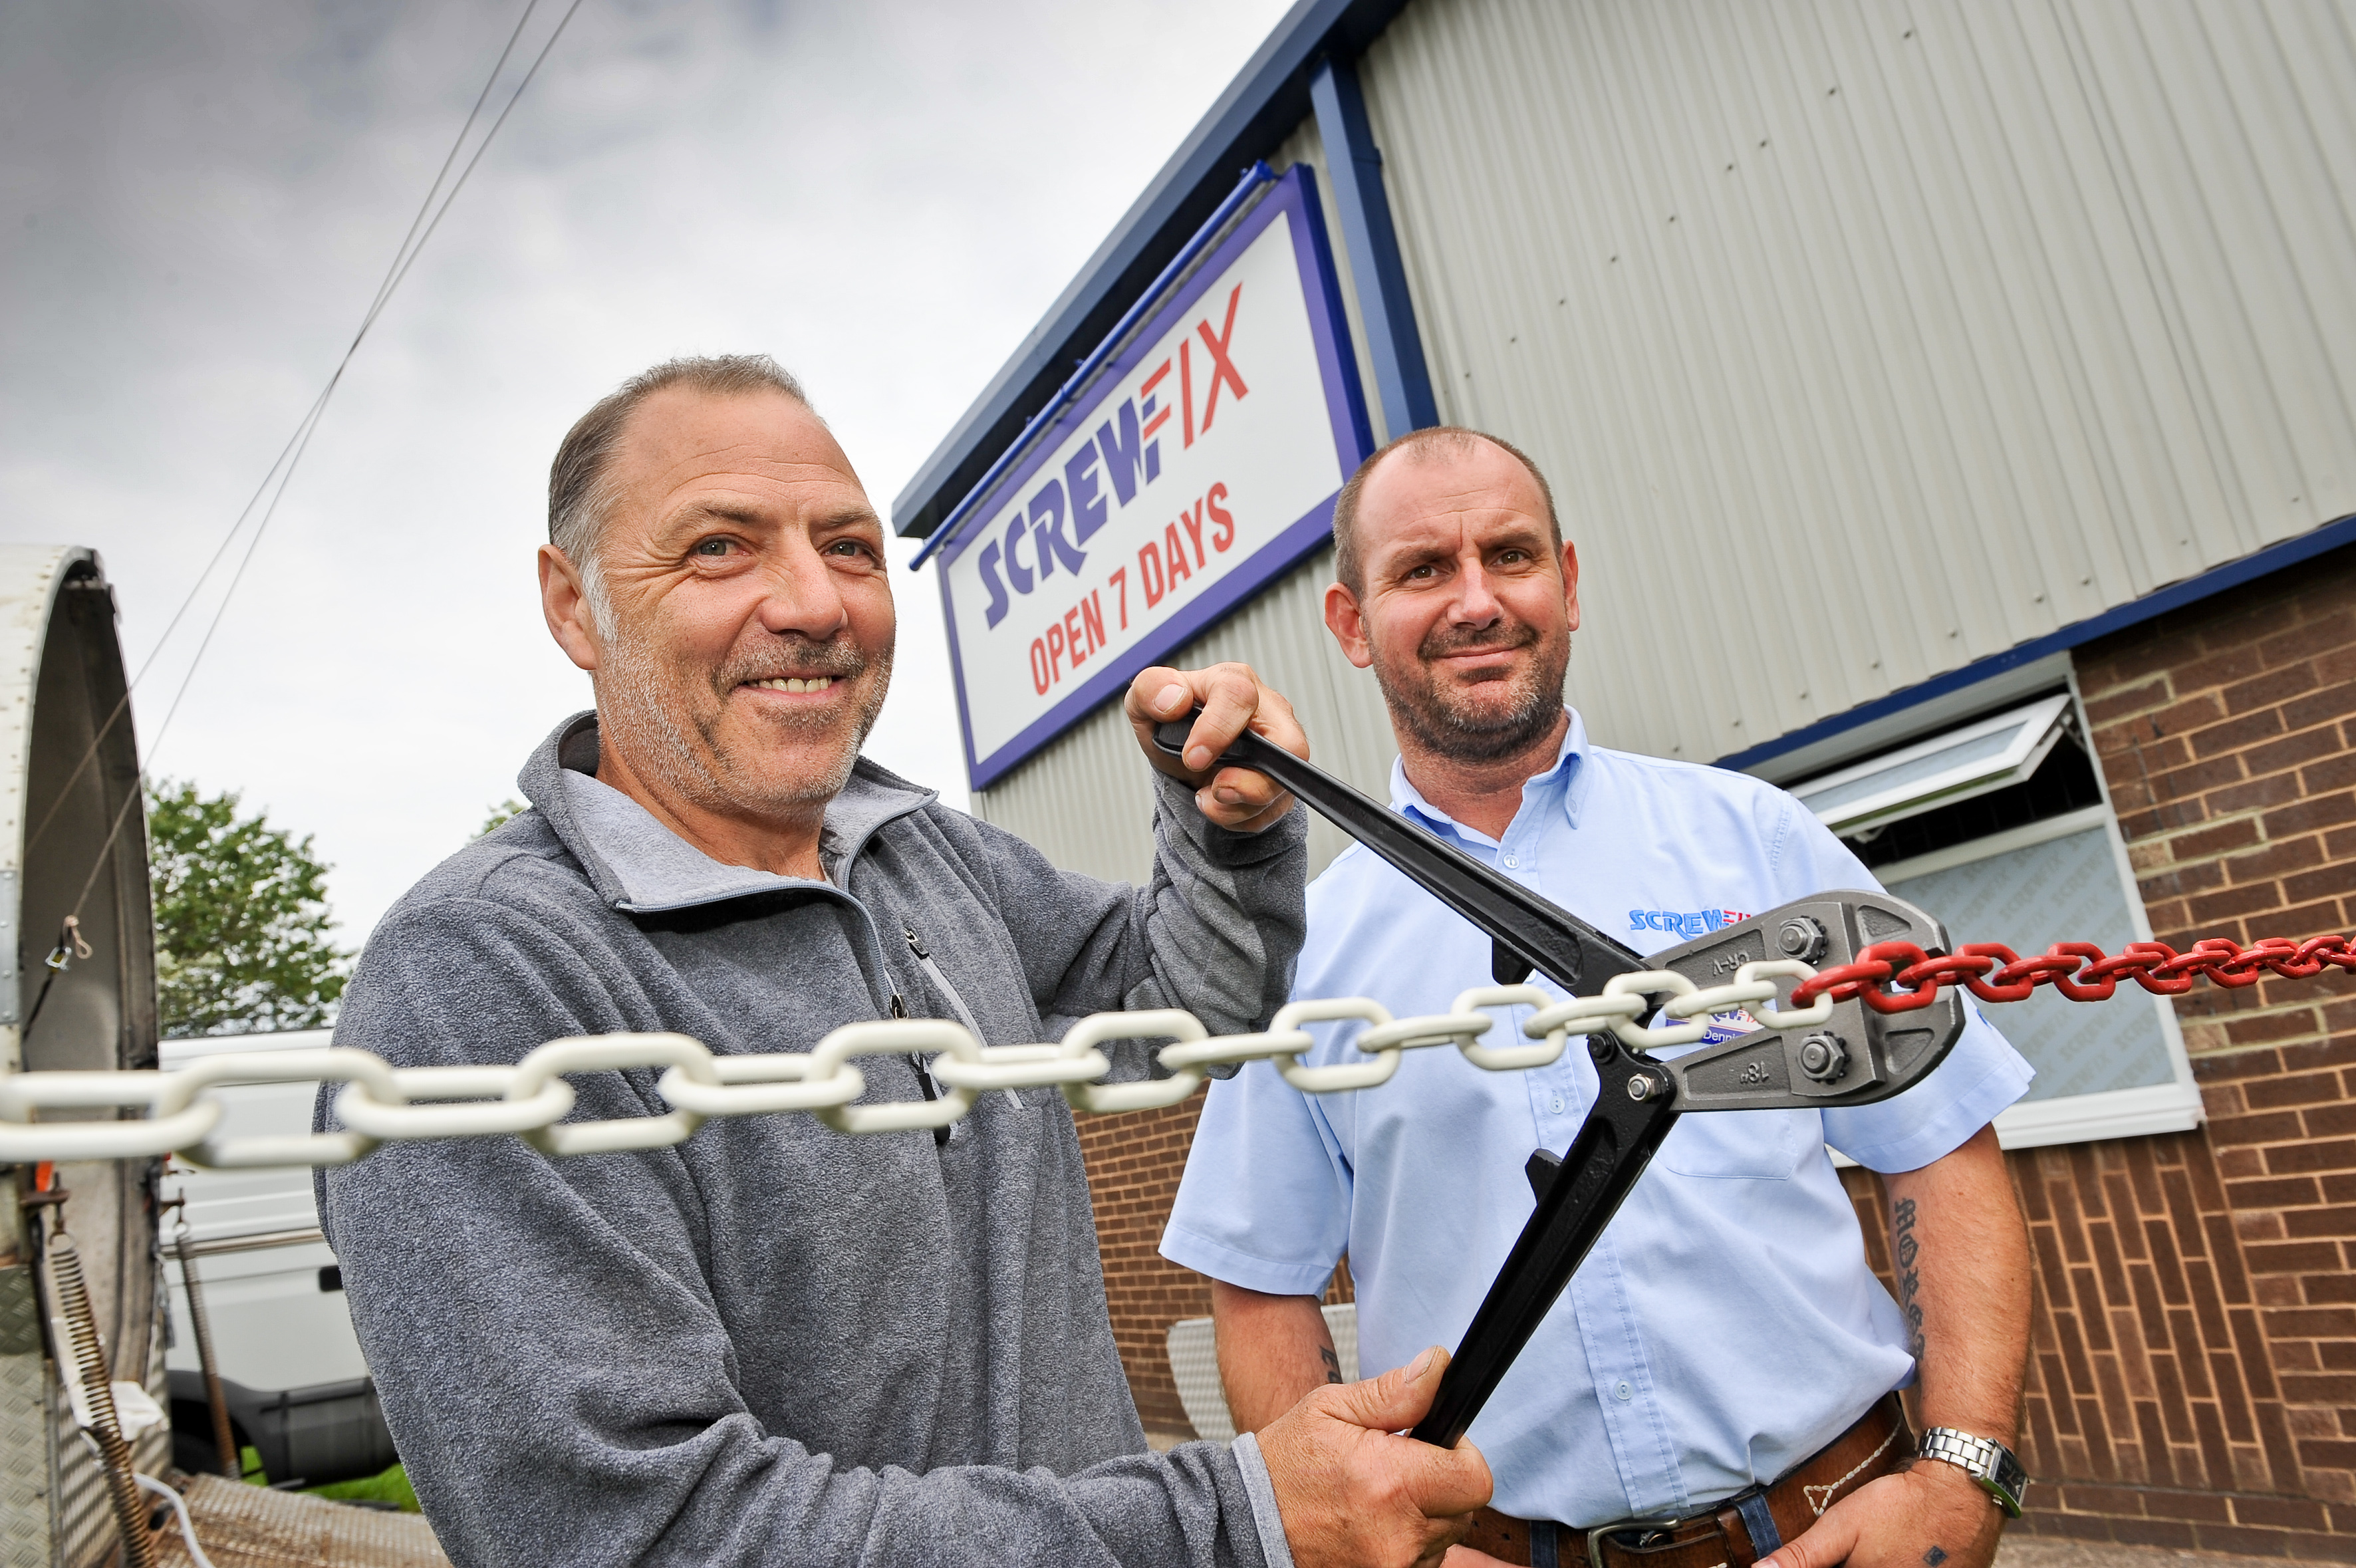 Sunderland’s second Screwfix store is declared a runaway success